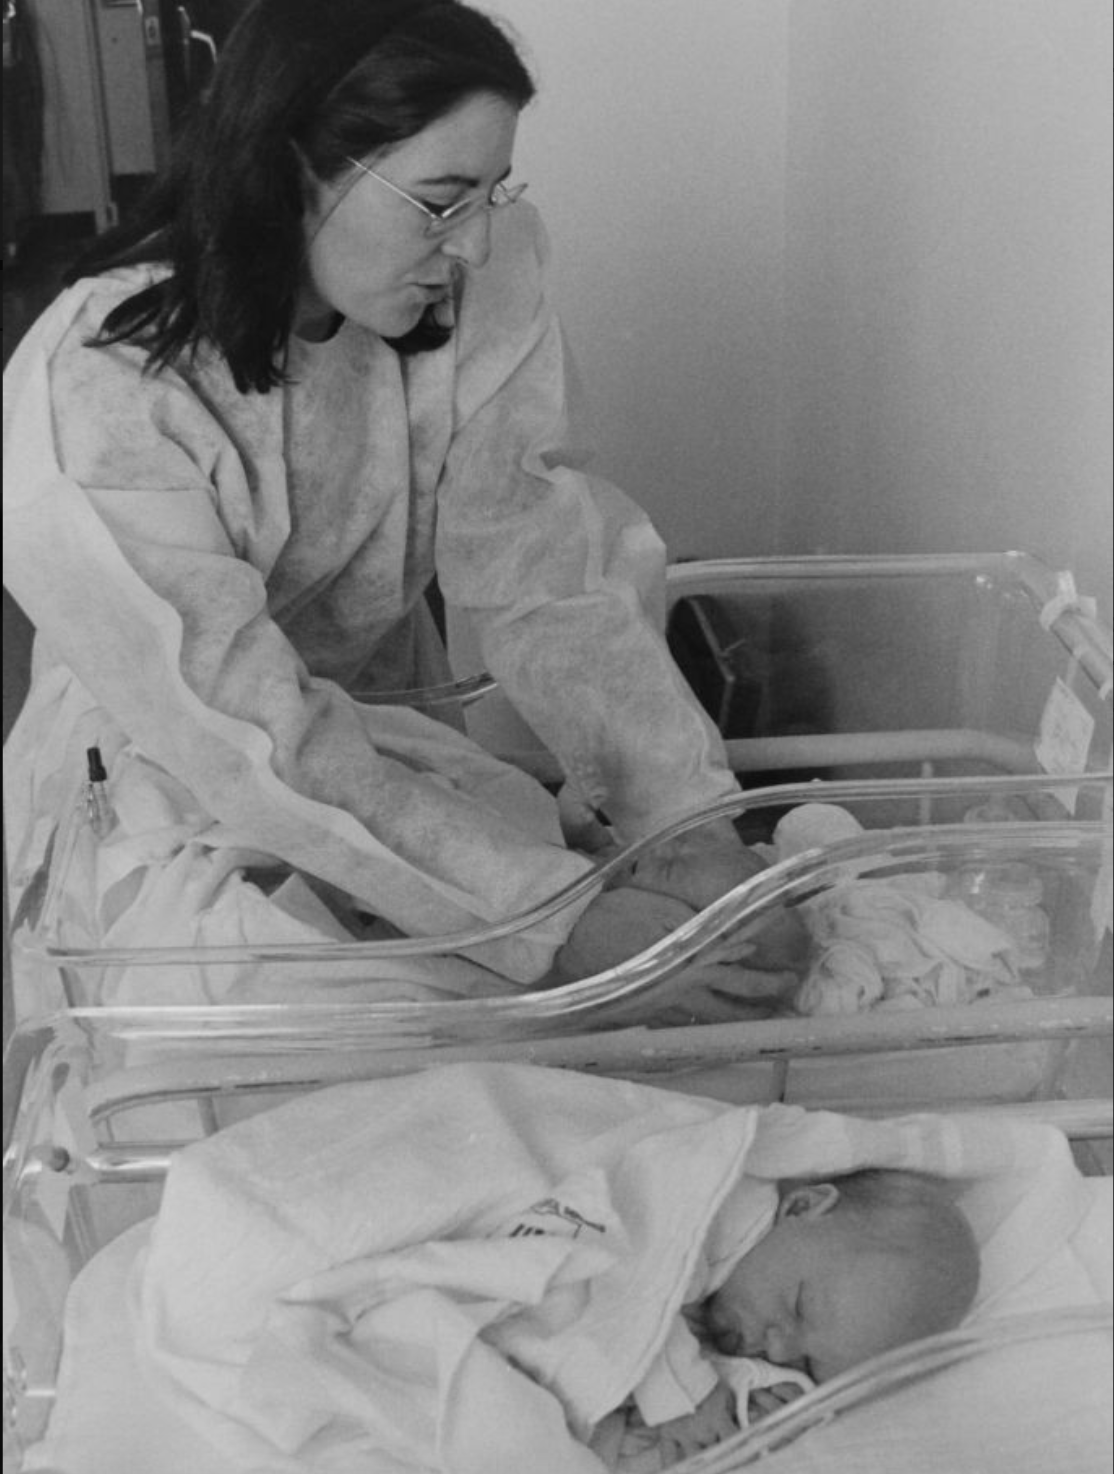 A woman in hospital garb tends to two babies in clear, hospital cribs.